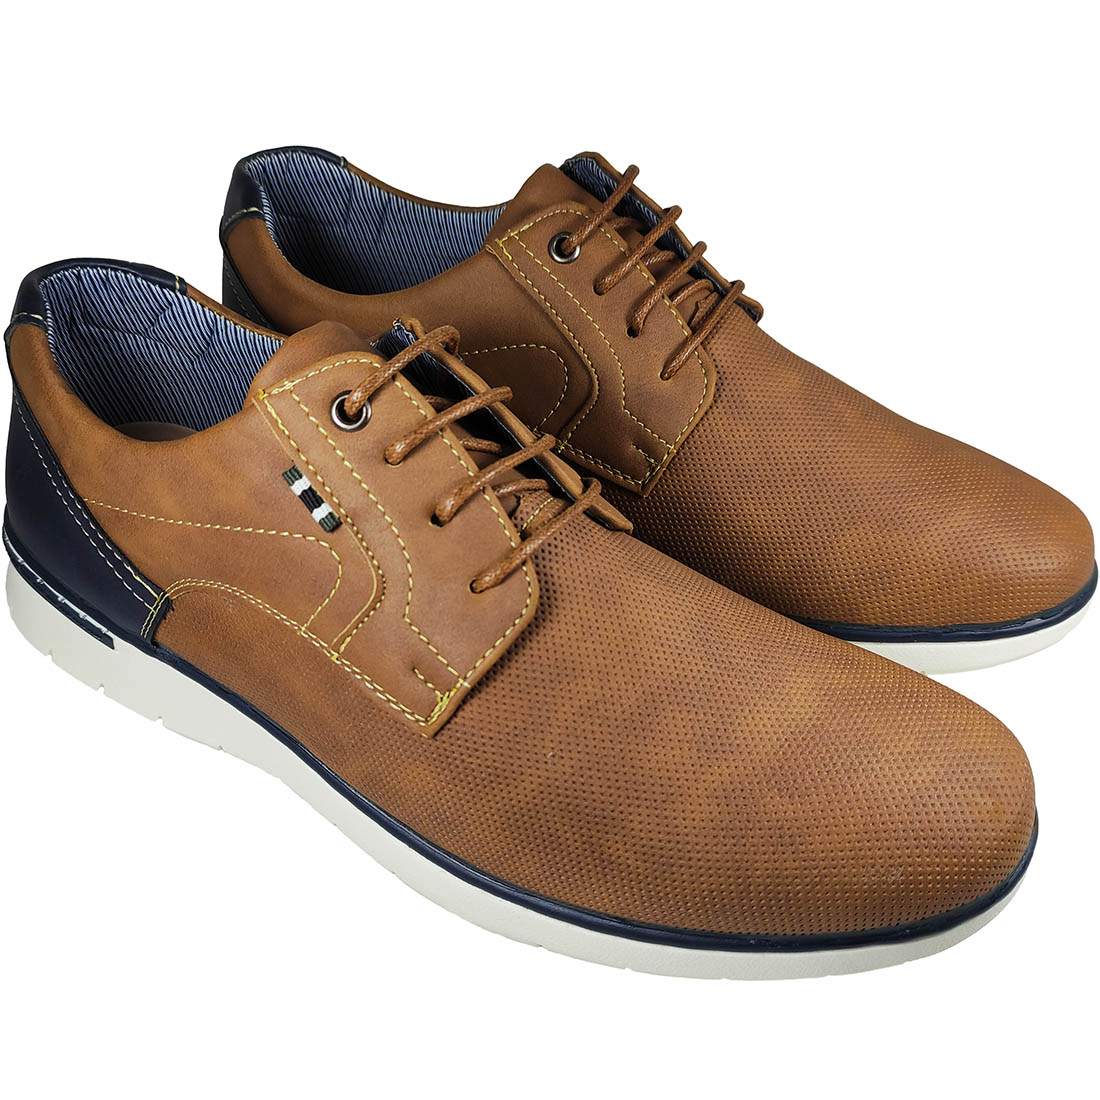 Mens Casual Anatomic Shoes Cockers SD52016 Camel